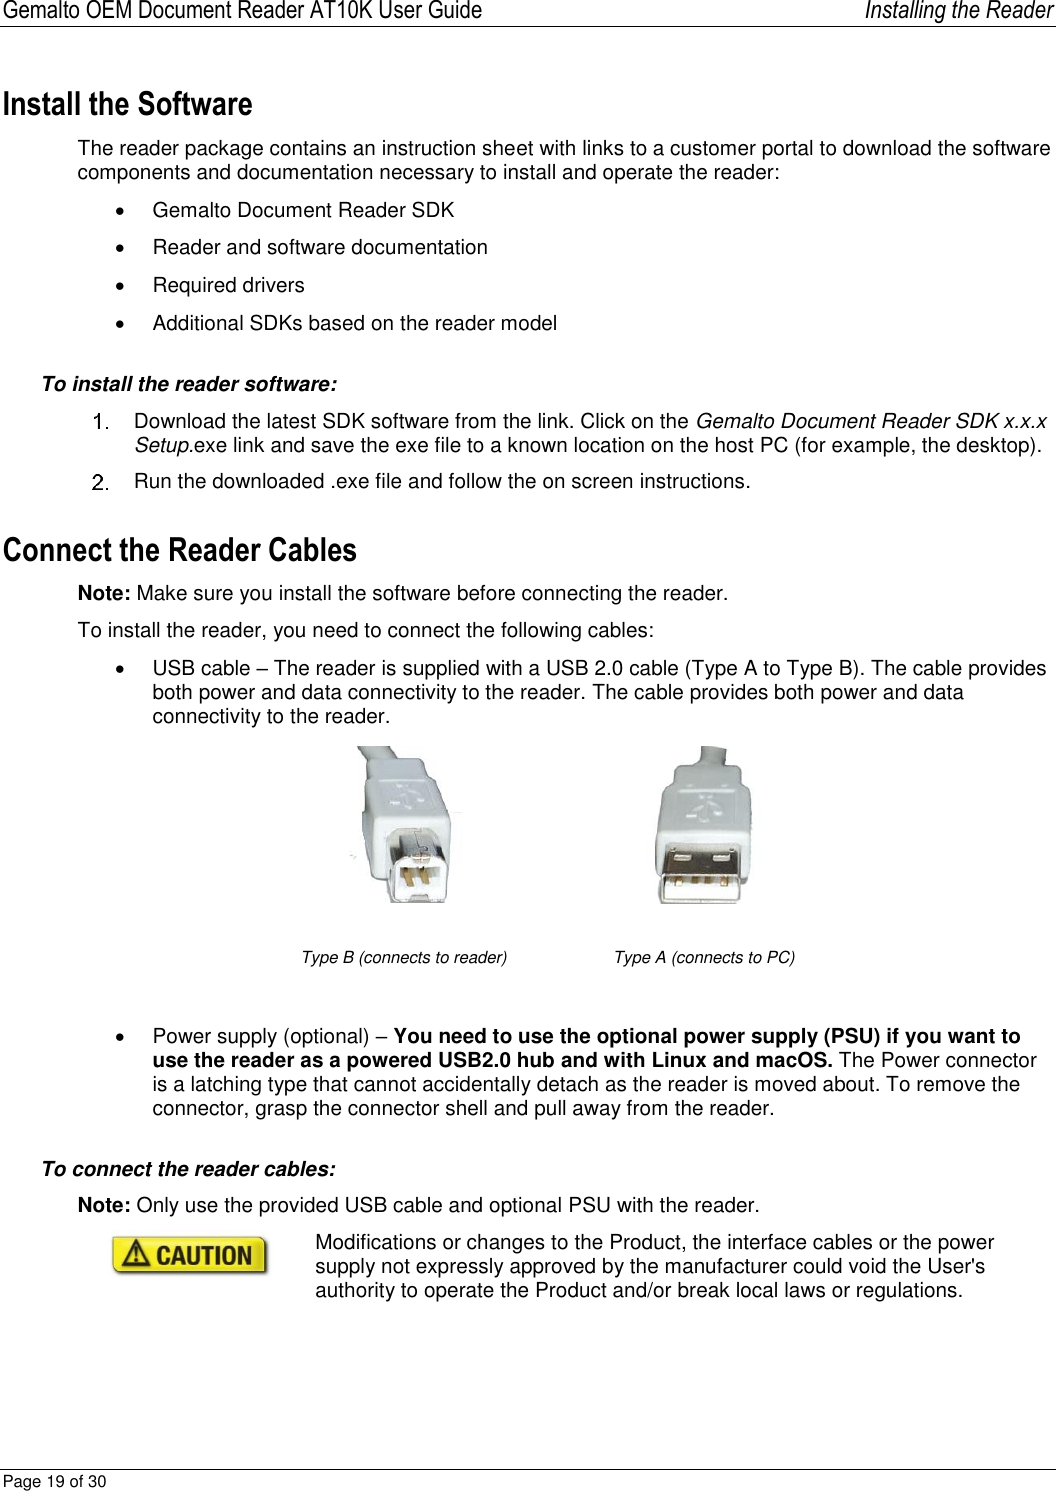 Gemalto OEM Document Reader AT10K User Guide   Installing the Reader Page 19 of 30  Install the Software The reader package contains an instruction sheet with links to a customer portal to download the software components and documentation necessary to install and operate the reader:   Gemalto Document Reader SDK   Reader and software documentation   Required drivers   Additional SDKs based on the reader model To install the reader software:   Download the latest SDK software from the link. Click on the Gemalto Document Reader SDK x.x.x Setup.exe link and save the exe file to a known location on the host PC (for example, the desktop).   Run the downloaded .exe file and follow the on screen instructions. Connect the Reader Cables Note: Make sure you install the software before connecting the reader. To install the reader, you need to connect the following cables:   USB cable – The reader is supplied with a USB 2.0 cable (Type A to Type B). The cable provides both power and data connectivity to the reader. The cable provides both power and data connectivity to the reader.   Type B (connects to reader) Type A (connects to PC)    Power supply (optional) – You need to use the optional power supply (PSU) if you want to use the reader as a powered USB2.0 hub and with Linux and macOS. The Power connector is a latching type that cannot accidentally detach as the reader is moved about. To remove the connector, grasp the connector shell and pull away from the reader.  To connect the reader cables: Note: Only use the provided USB cable and optional PSU with the reader.   Modifications or changes to the Product, the interface cables or the power supply not expressly approved by the manufacturer could void the User&apos;s authority to operate the Product and/or break local laws or regulations. 